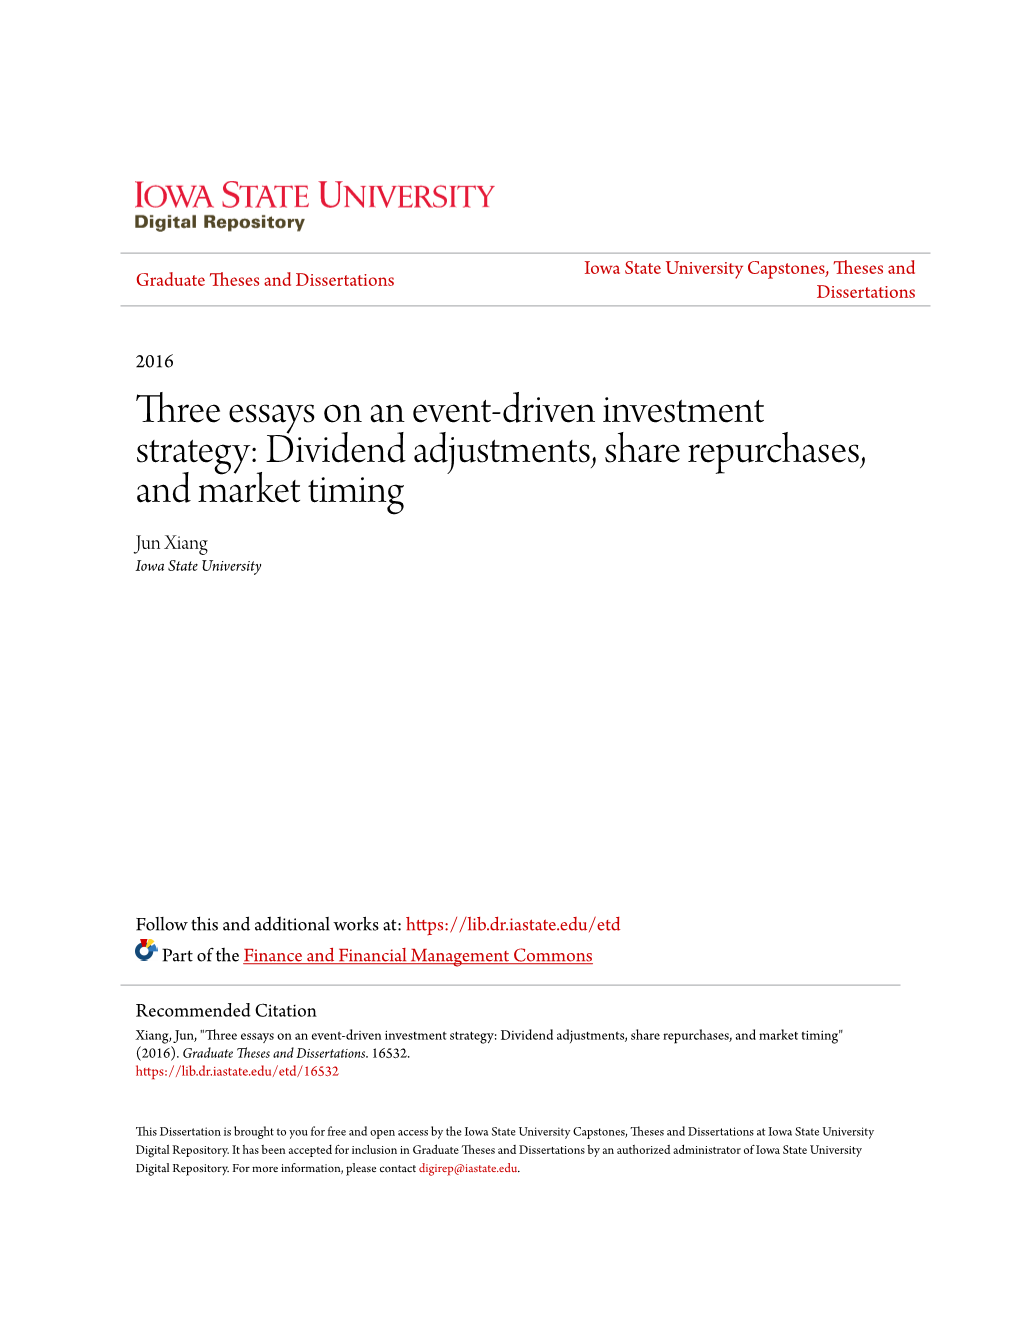 Three Essays on an Event-Driven Investment Strategy: Dividend Adjustments, Share Repurchases, and Market Timing Jun Xiang Iowa State University